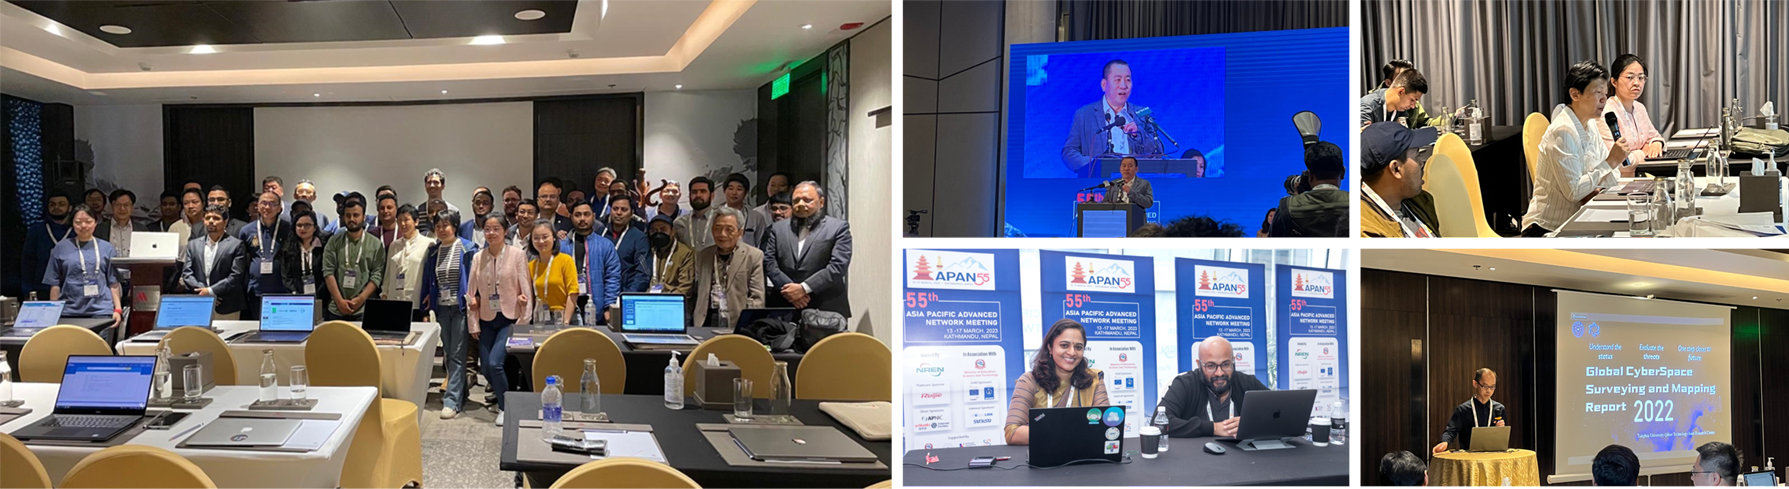 9 Sessions was Successfully Organized at APAN55